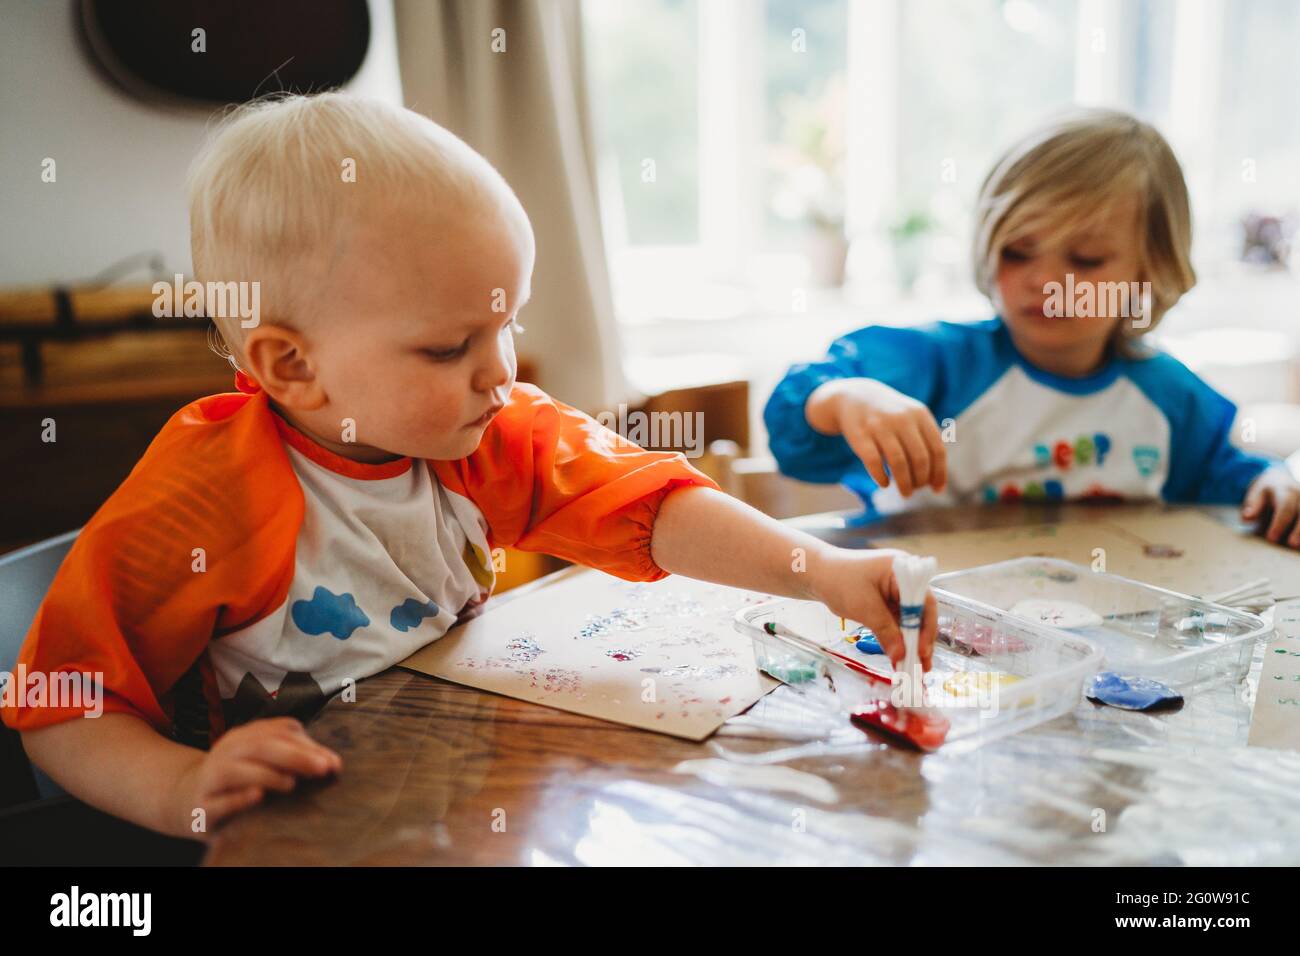 Blonde young children painting with lots of colorful paints at home Stock Photo